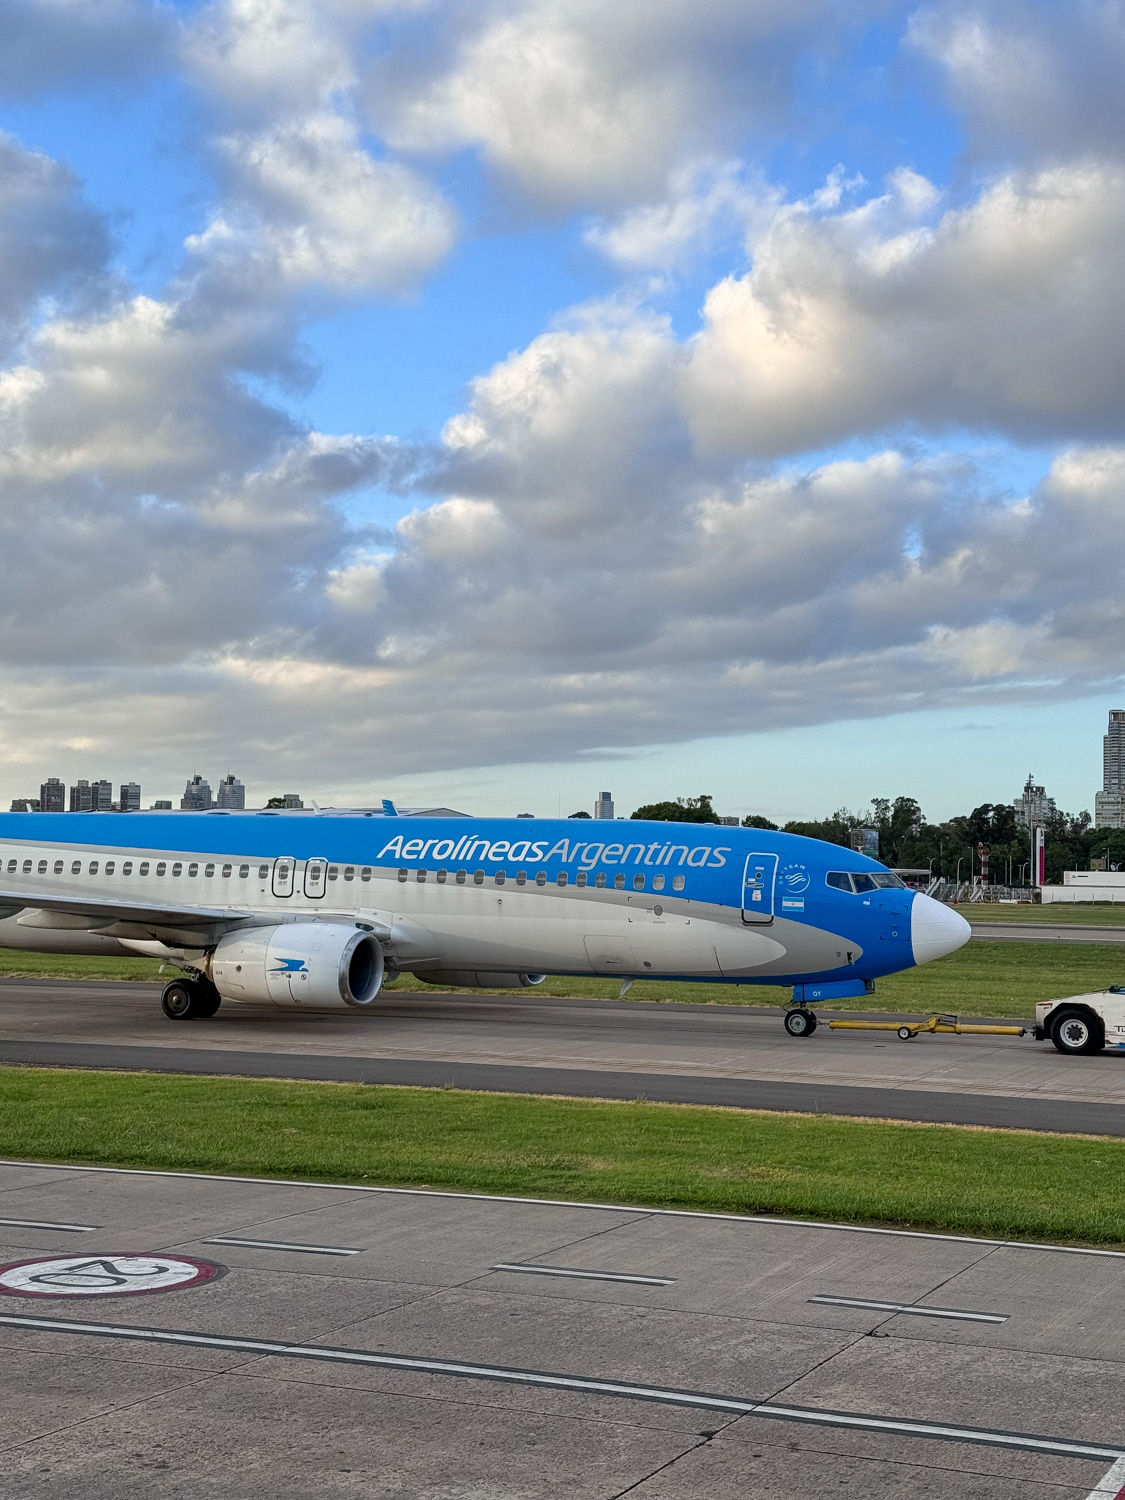 Flying domestically is a great way to get around Argentina 